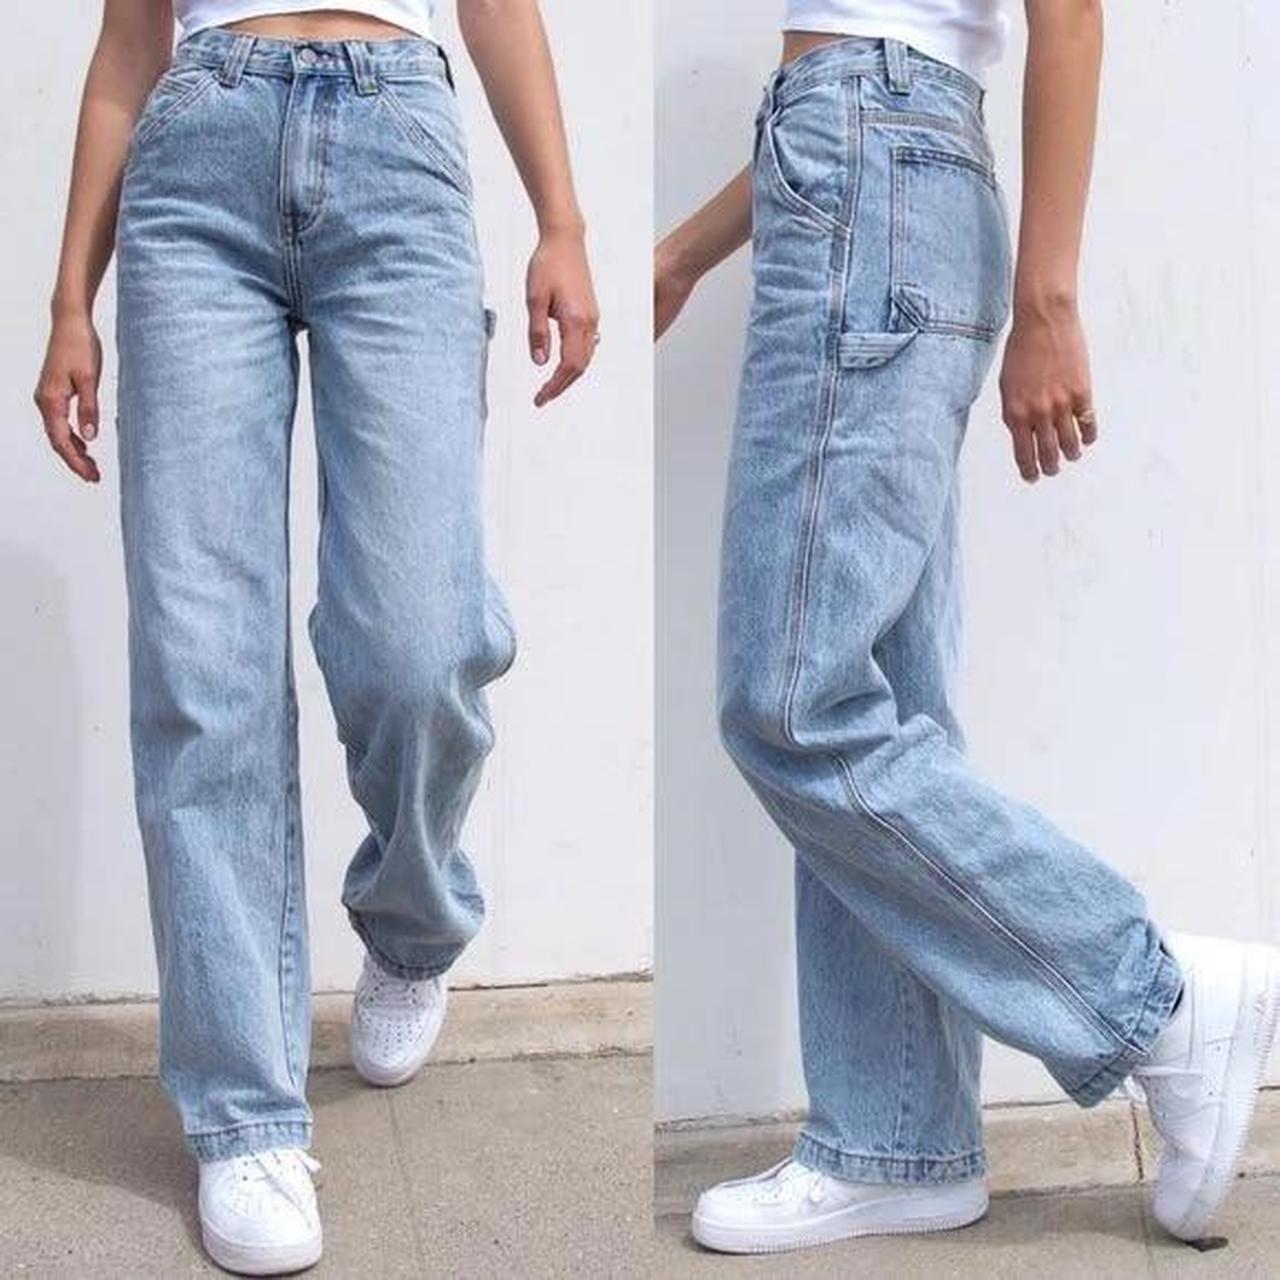 Brandy melville mid rise nora jeans Waist laying - Depop